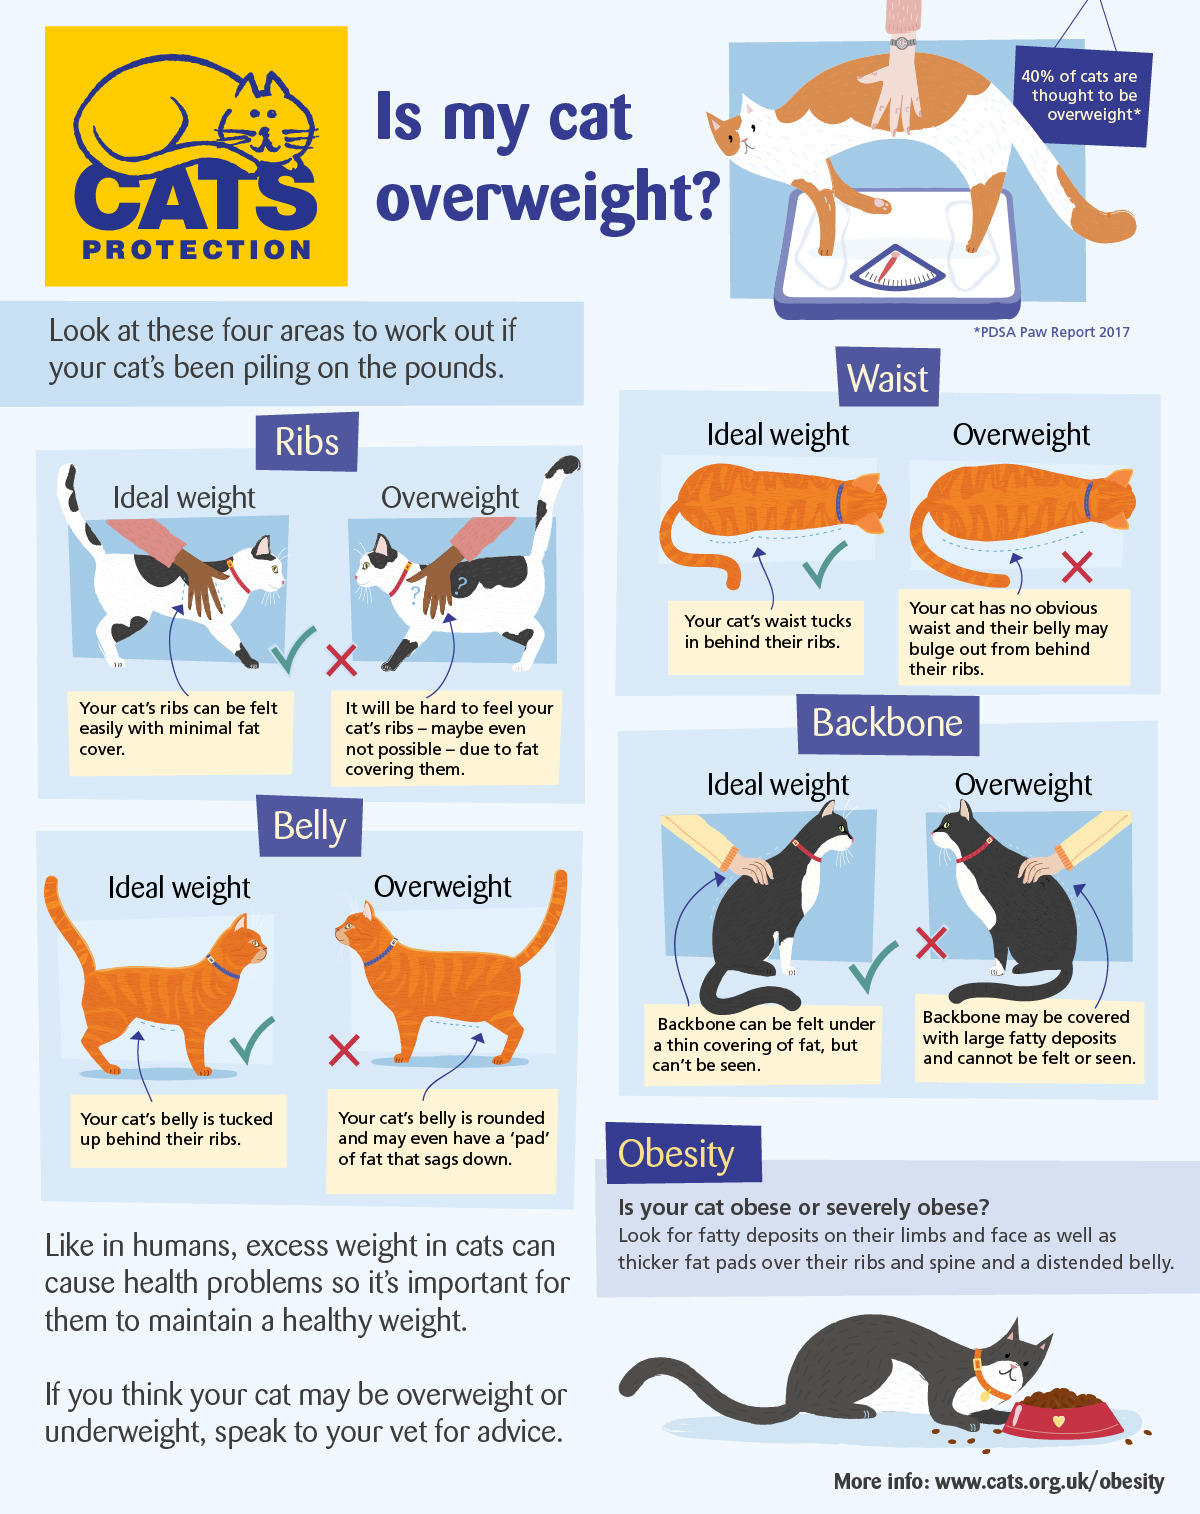 cats healthy weight